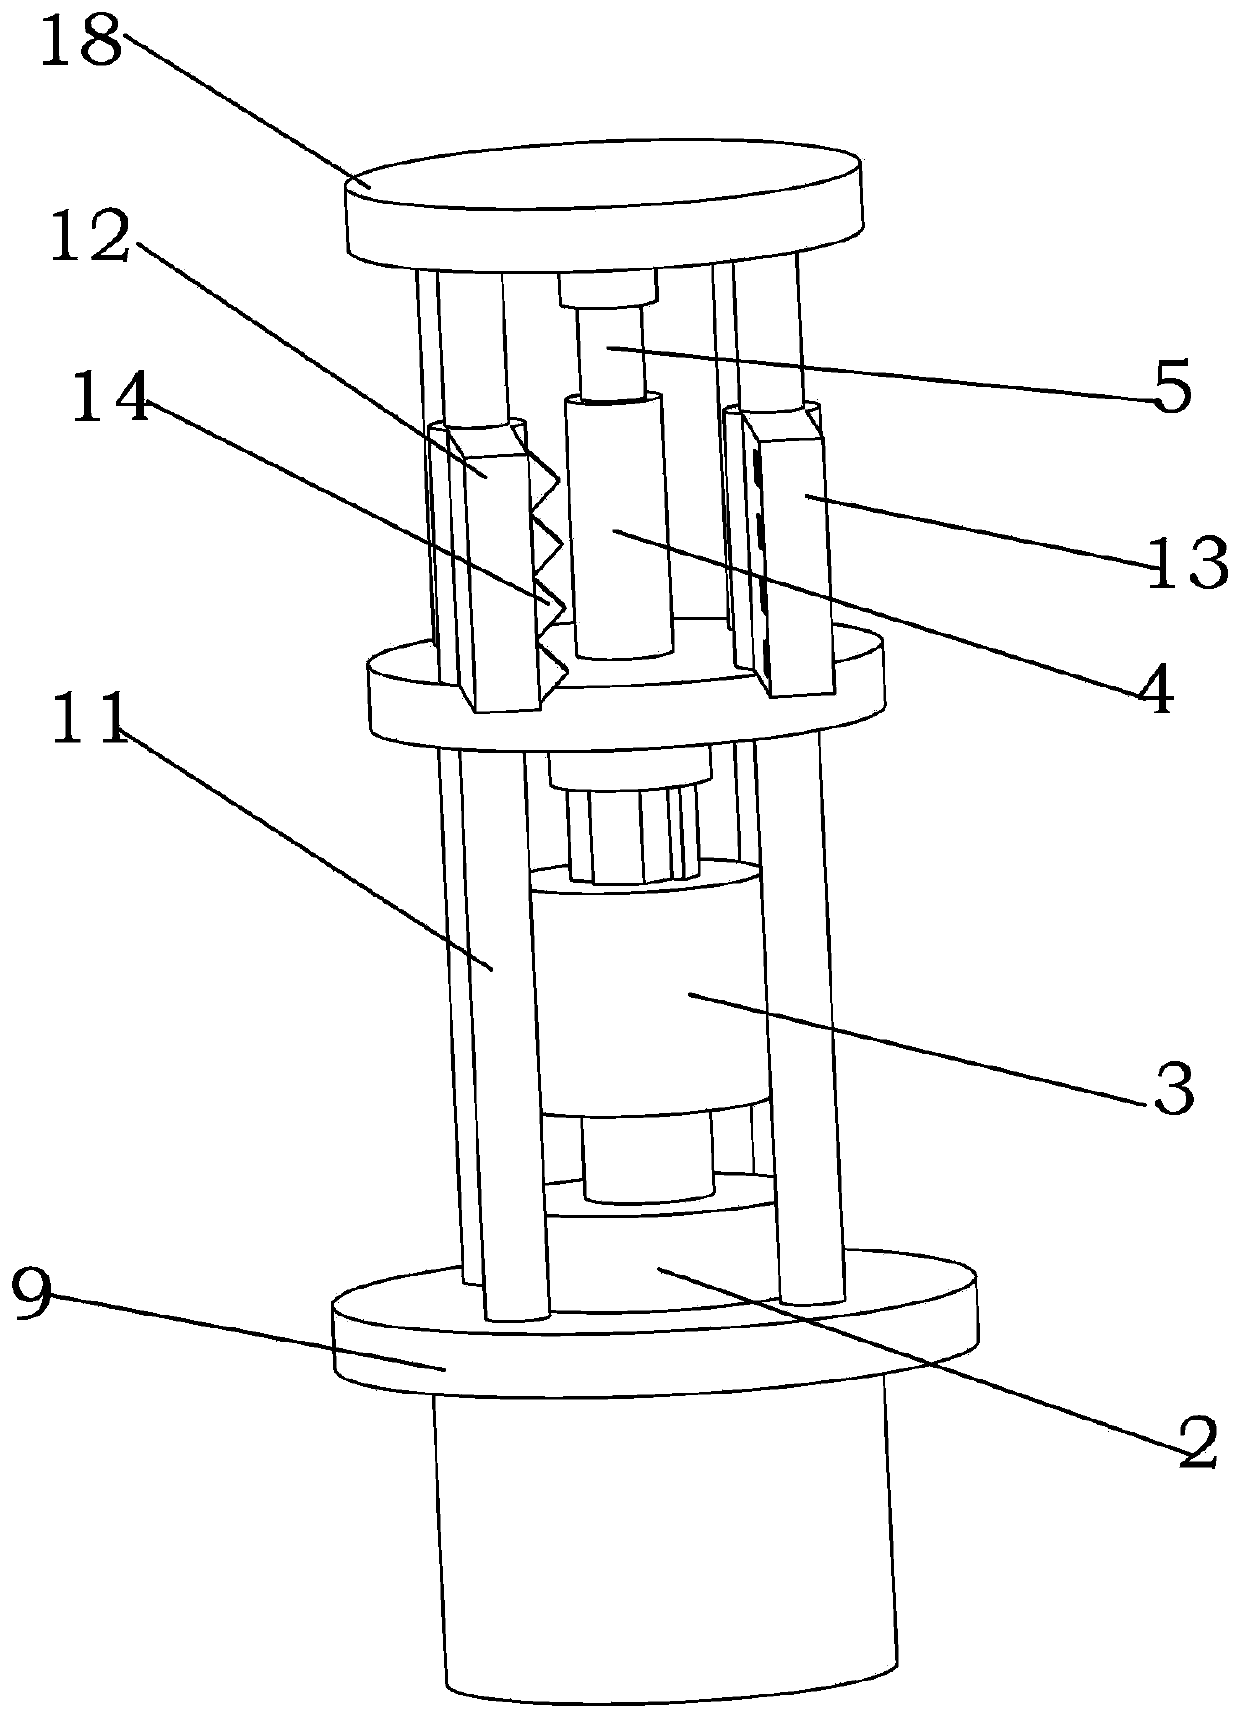 Finish banner rapid arrangement device for track and field sprint and arrangement method thereof